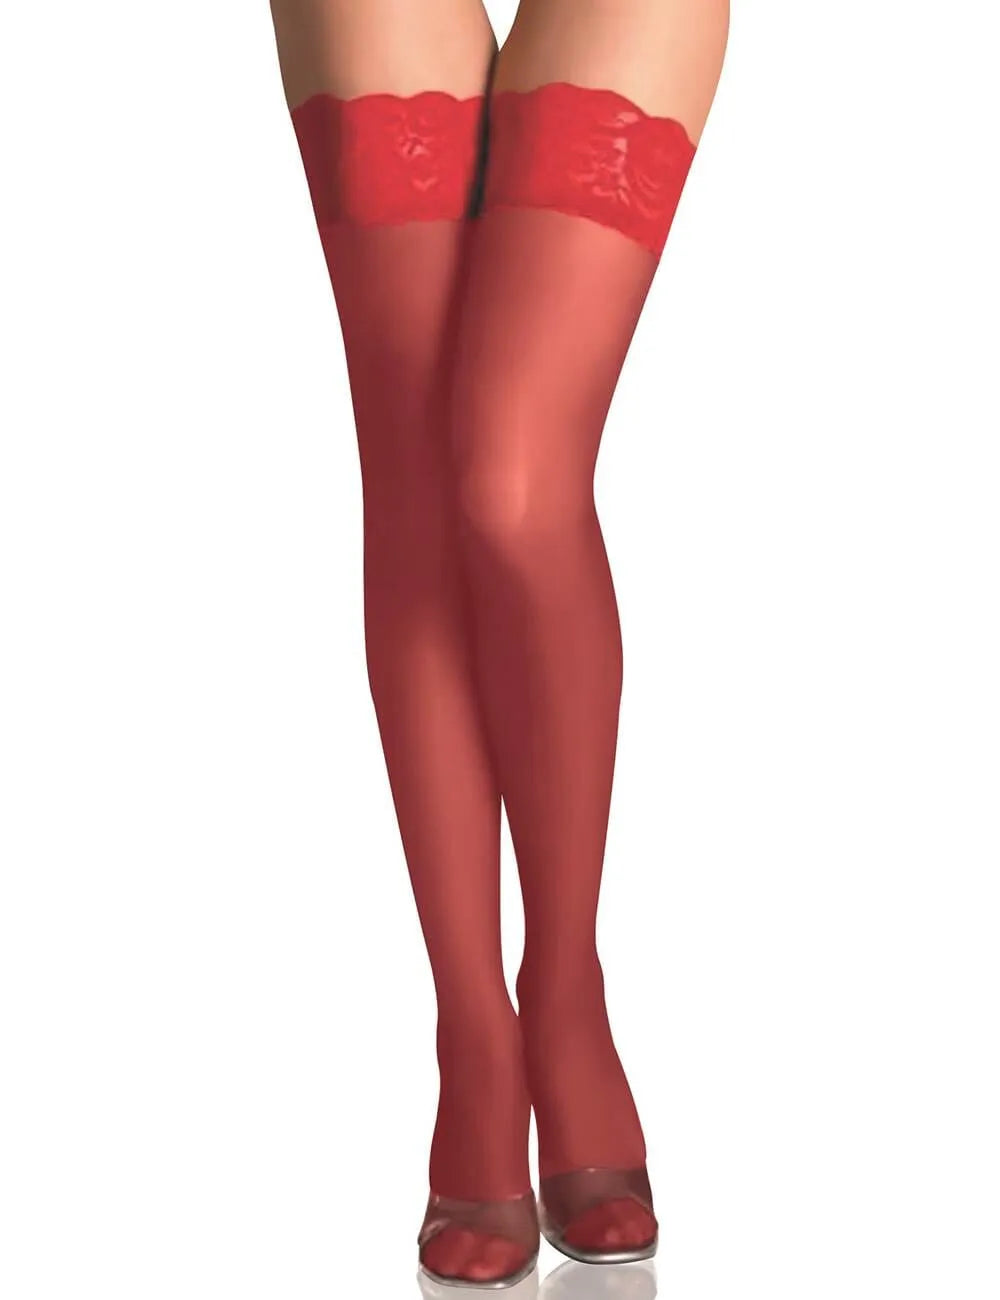 a woman wearing red stockings and high heels